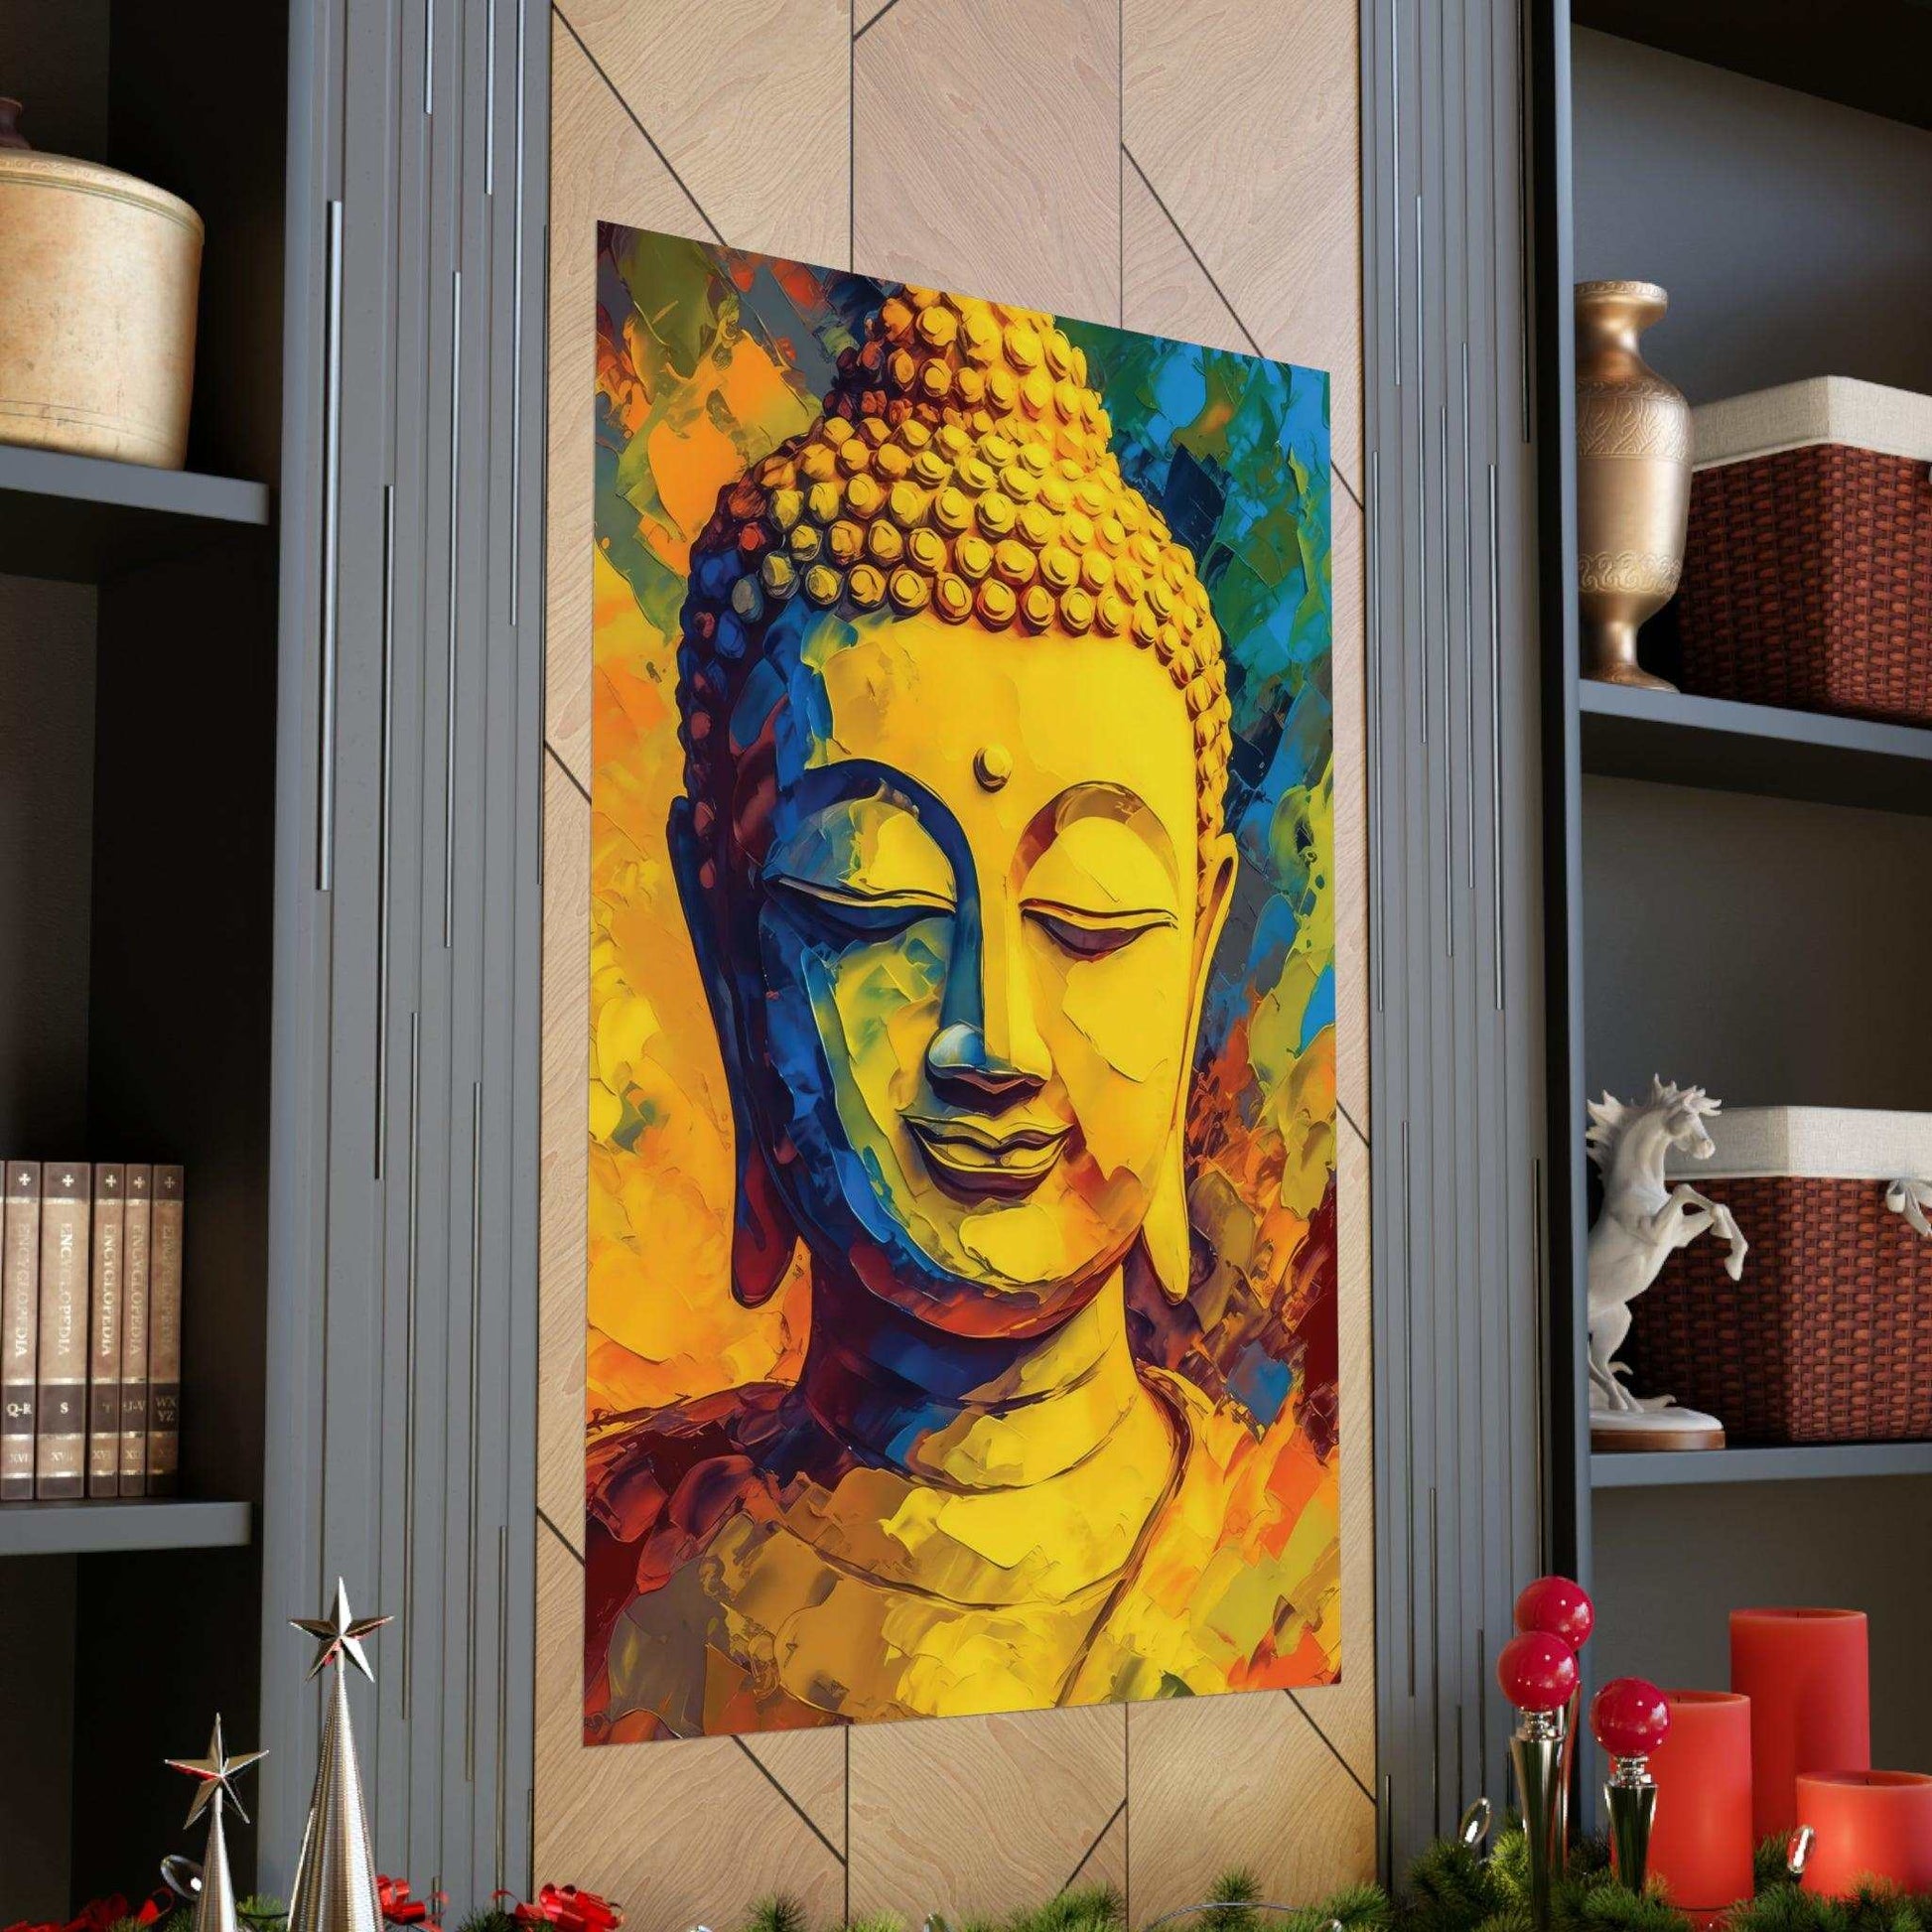 Vibrant portrait of the Buddha in rich shades of yellow, blue, and red, displayed prominently on a recessed wall niche, accompanied by festive holiday decor including red candles and silver star ornaments.